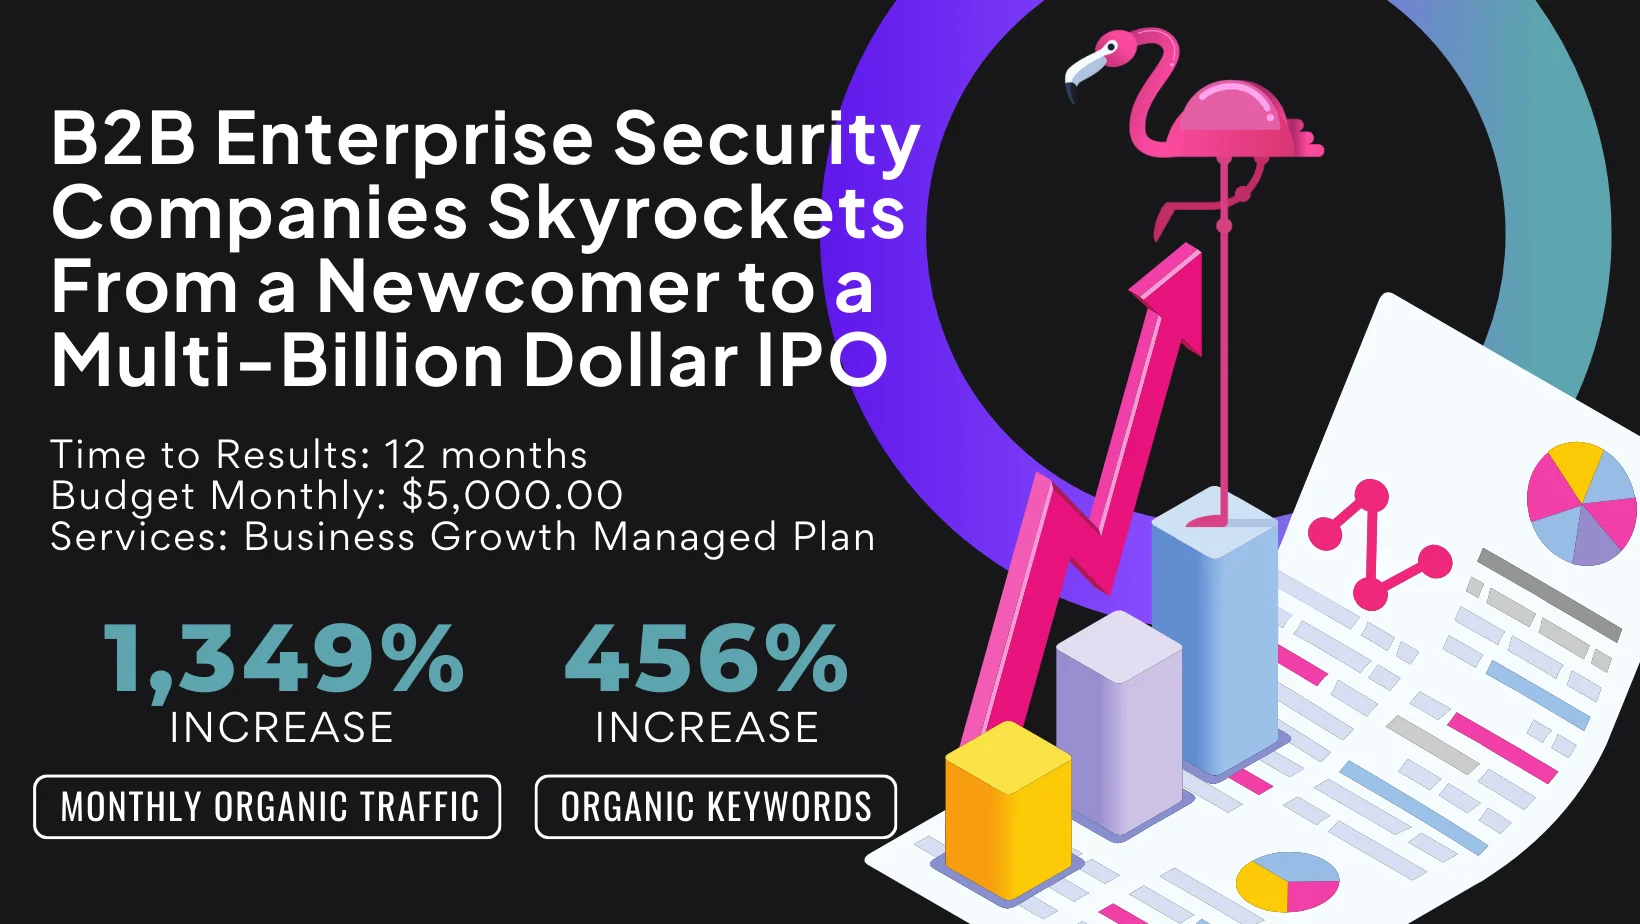 B2B Enterprise Security Companies Skyrockets From a Newcomer to a Multi-Billion Dollar IPO